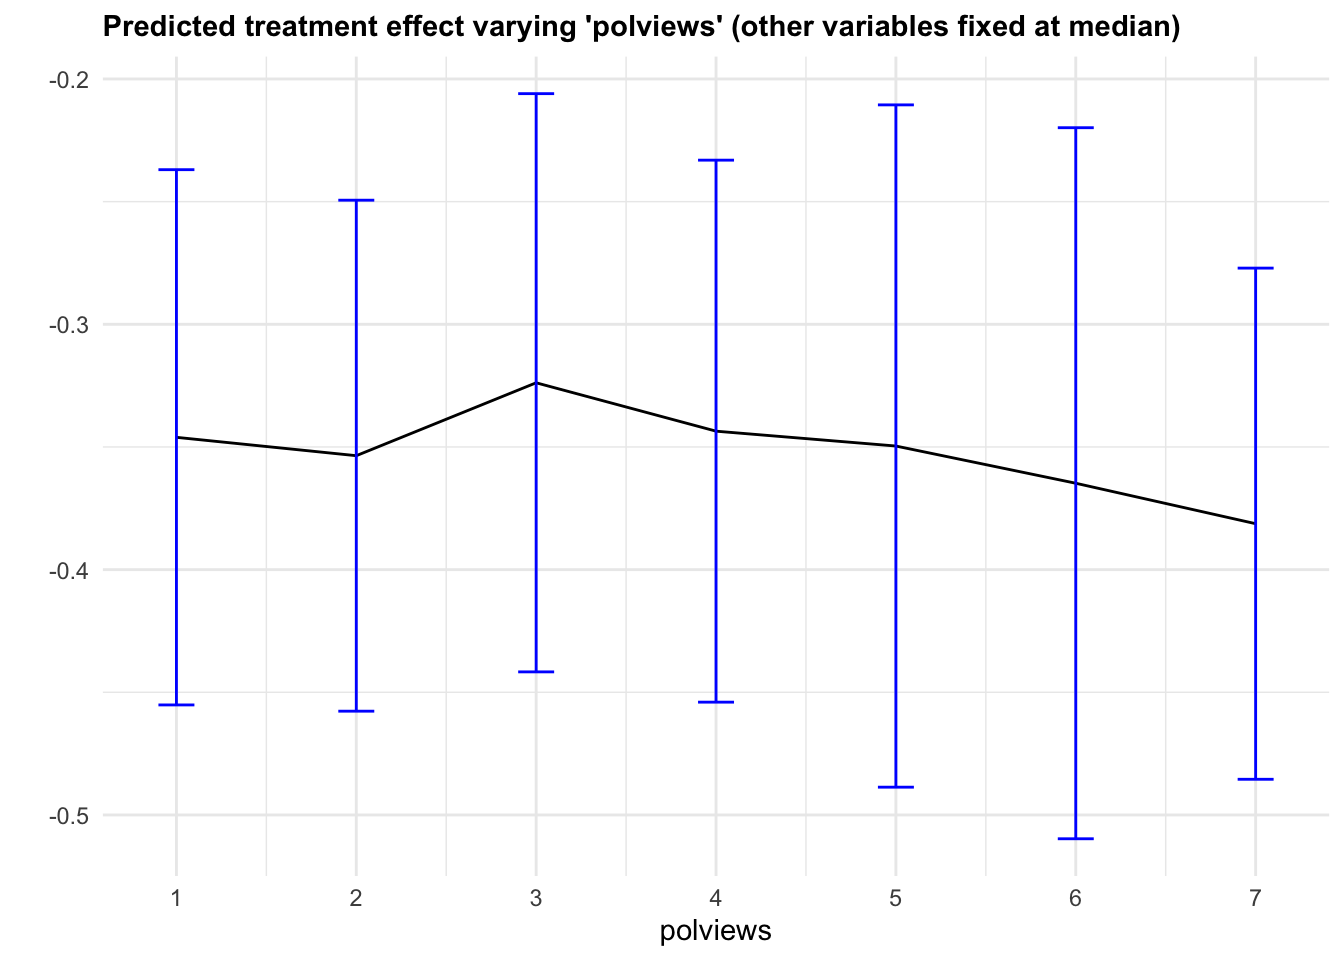 Predicted treatment effect varying one variable